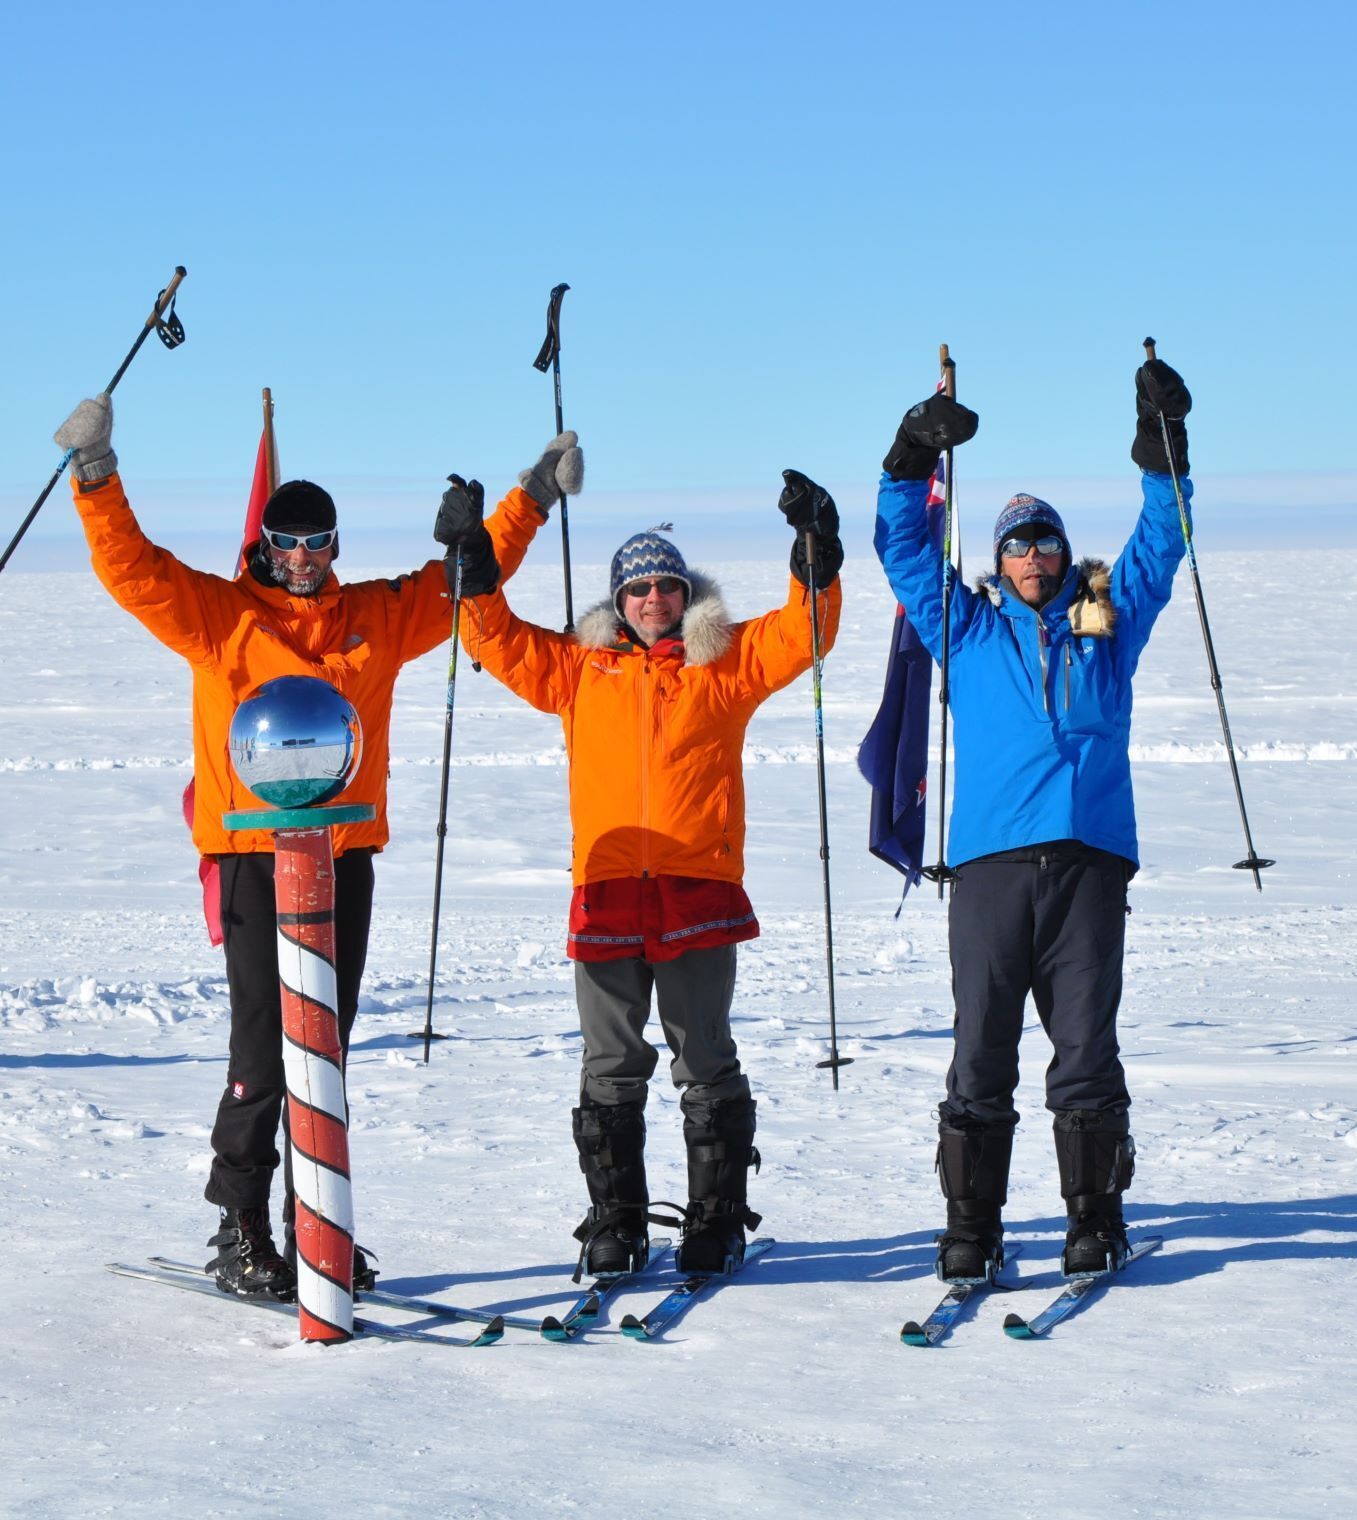 Skiers at South Pole Antarctica